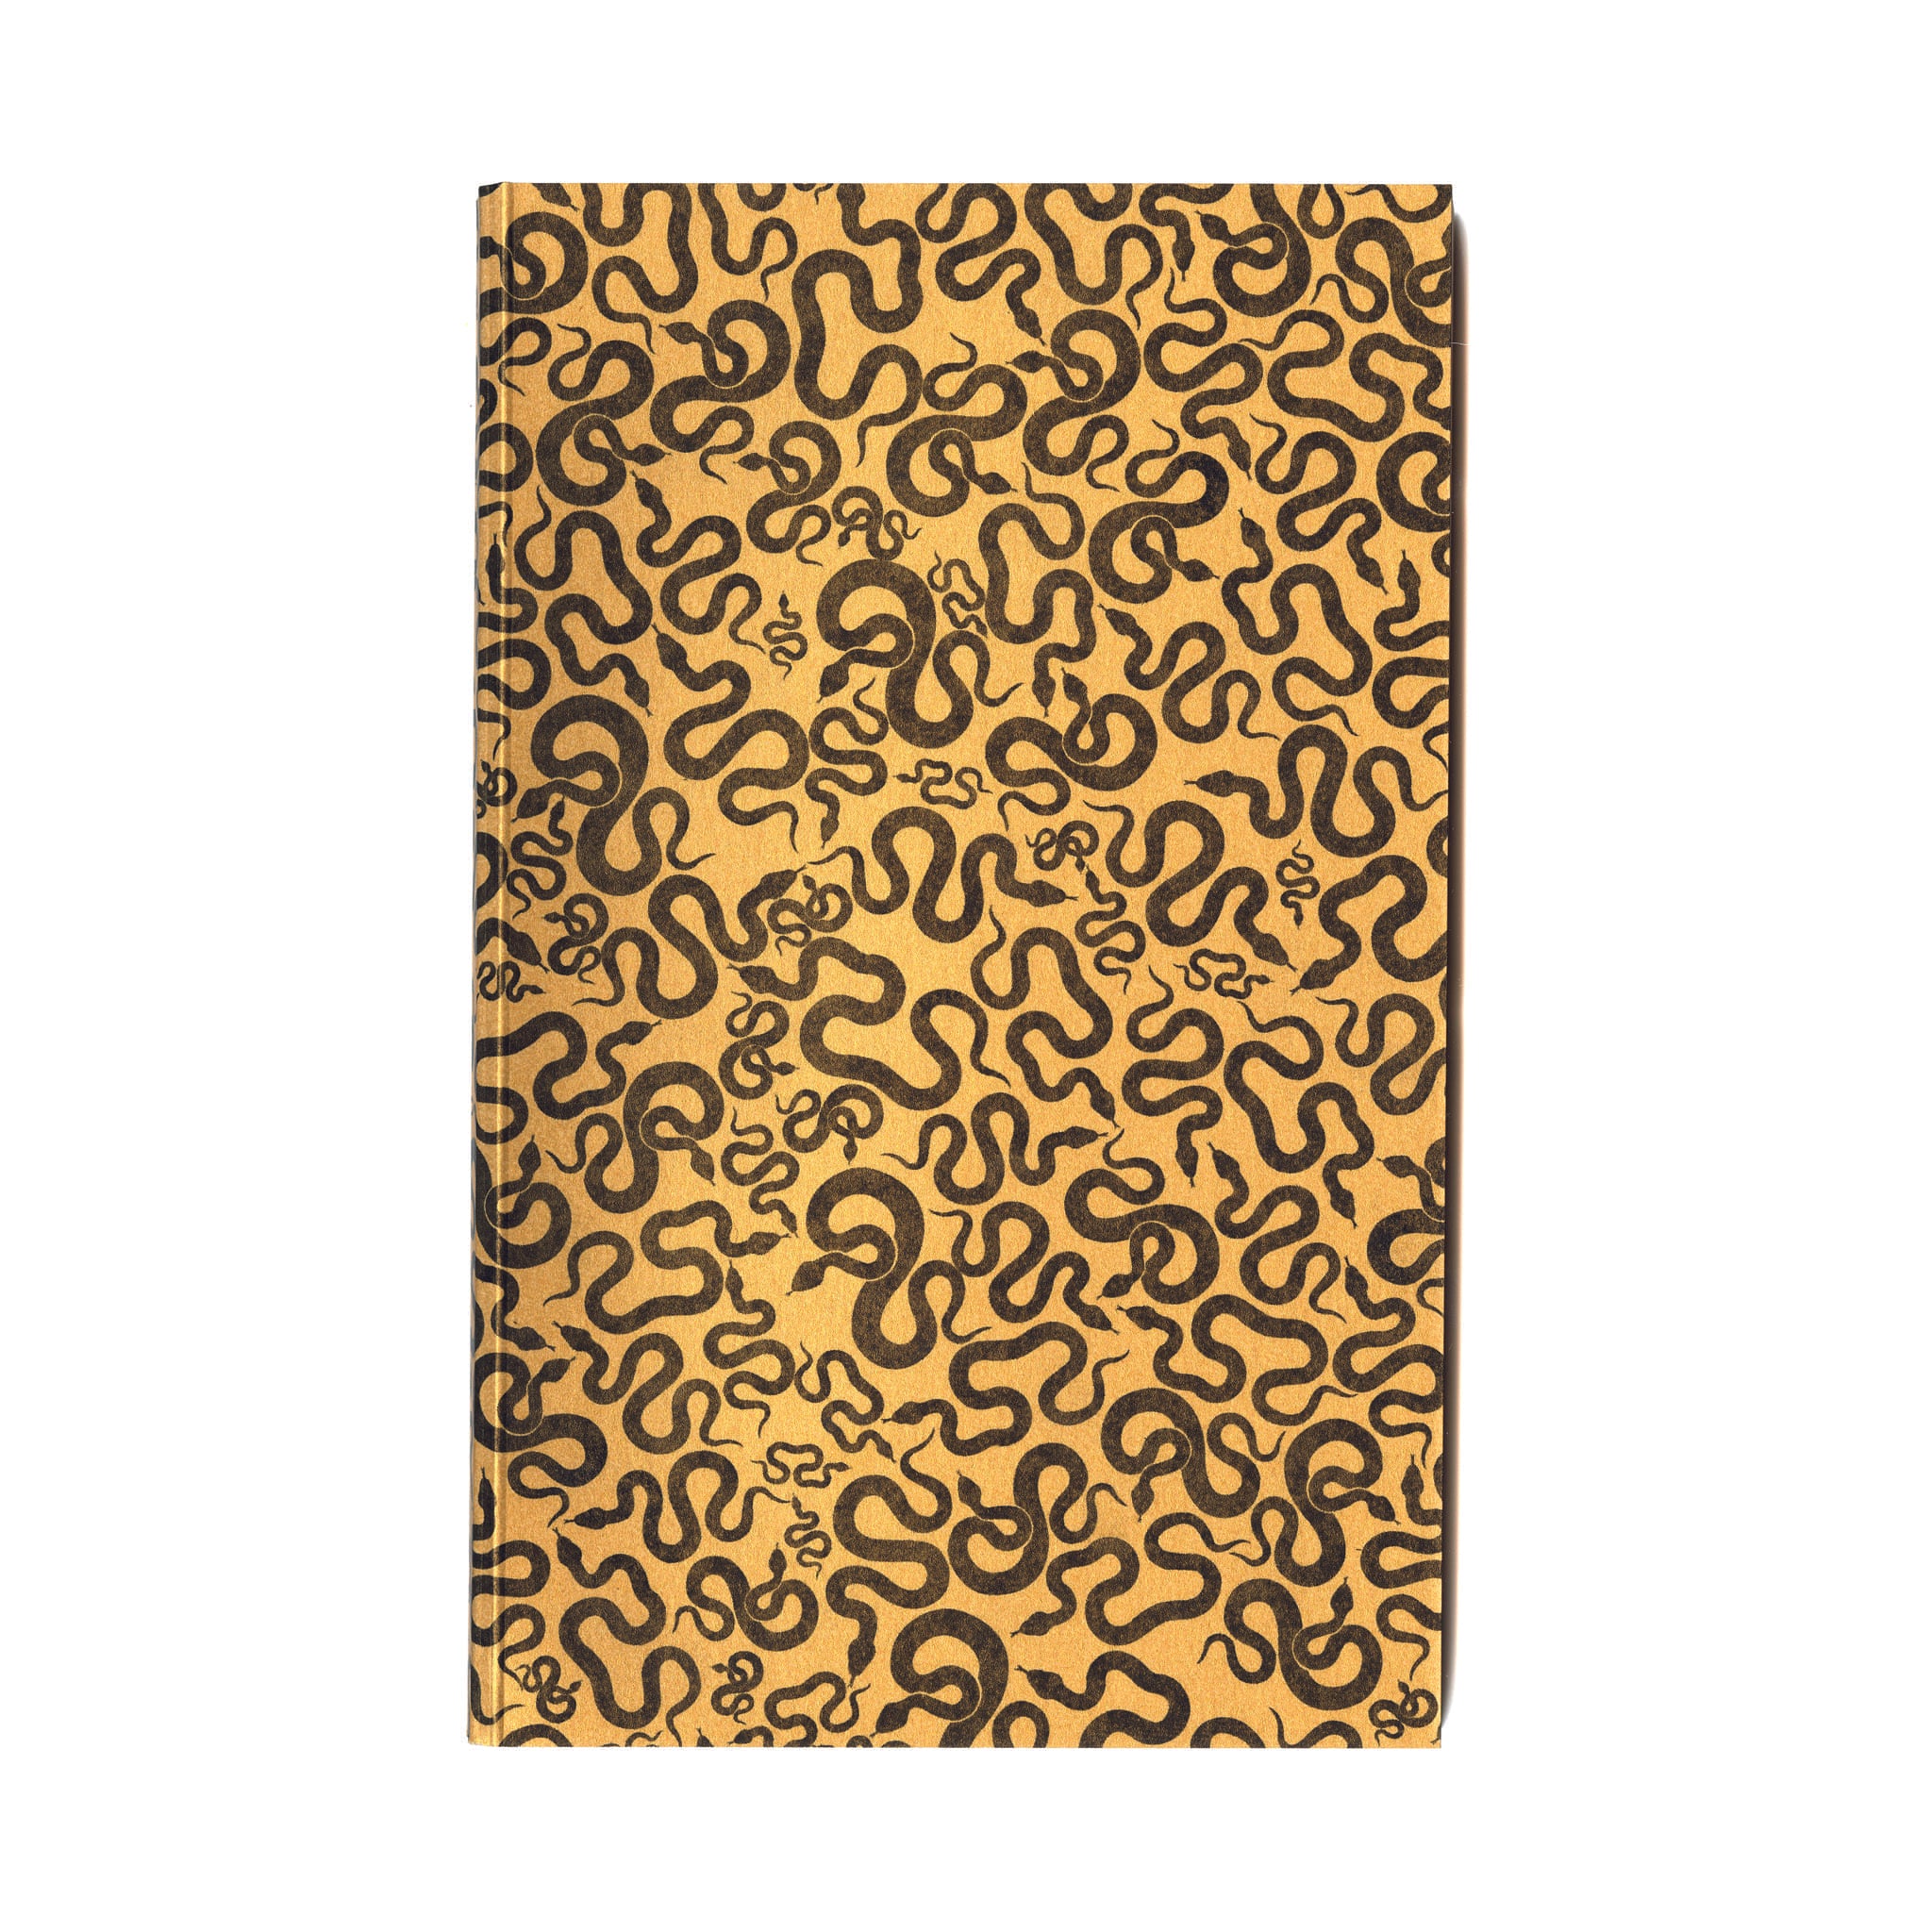 Everyday journal with yellow original snake design serpent cover & eighty 100% cotton paper pages